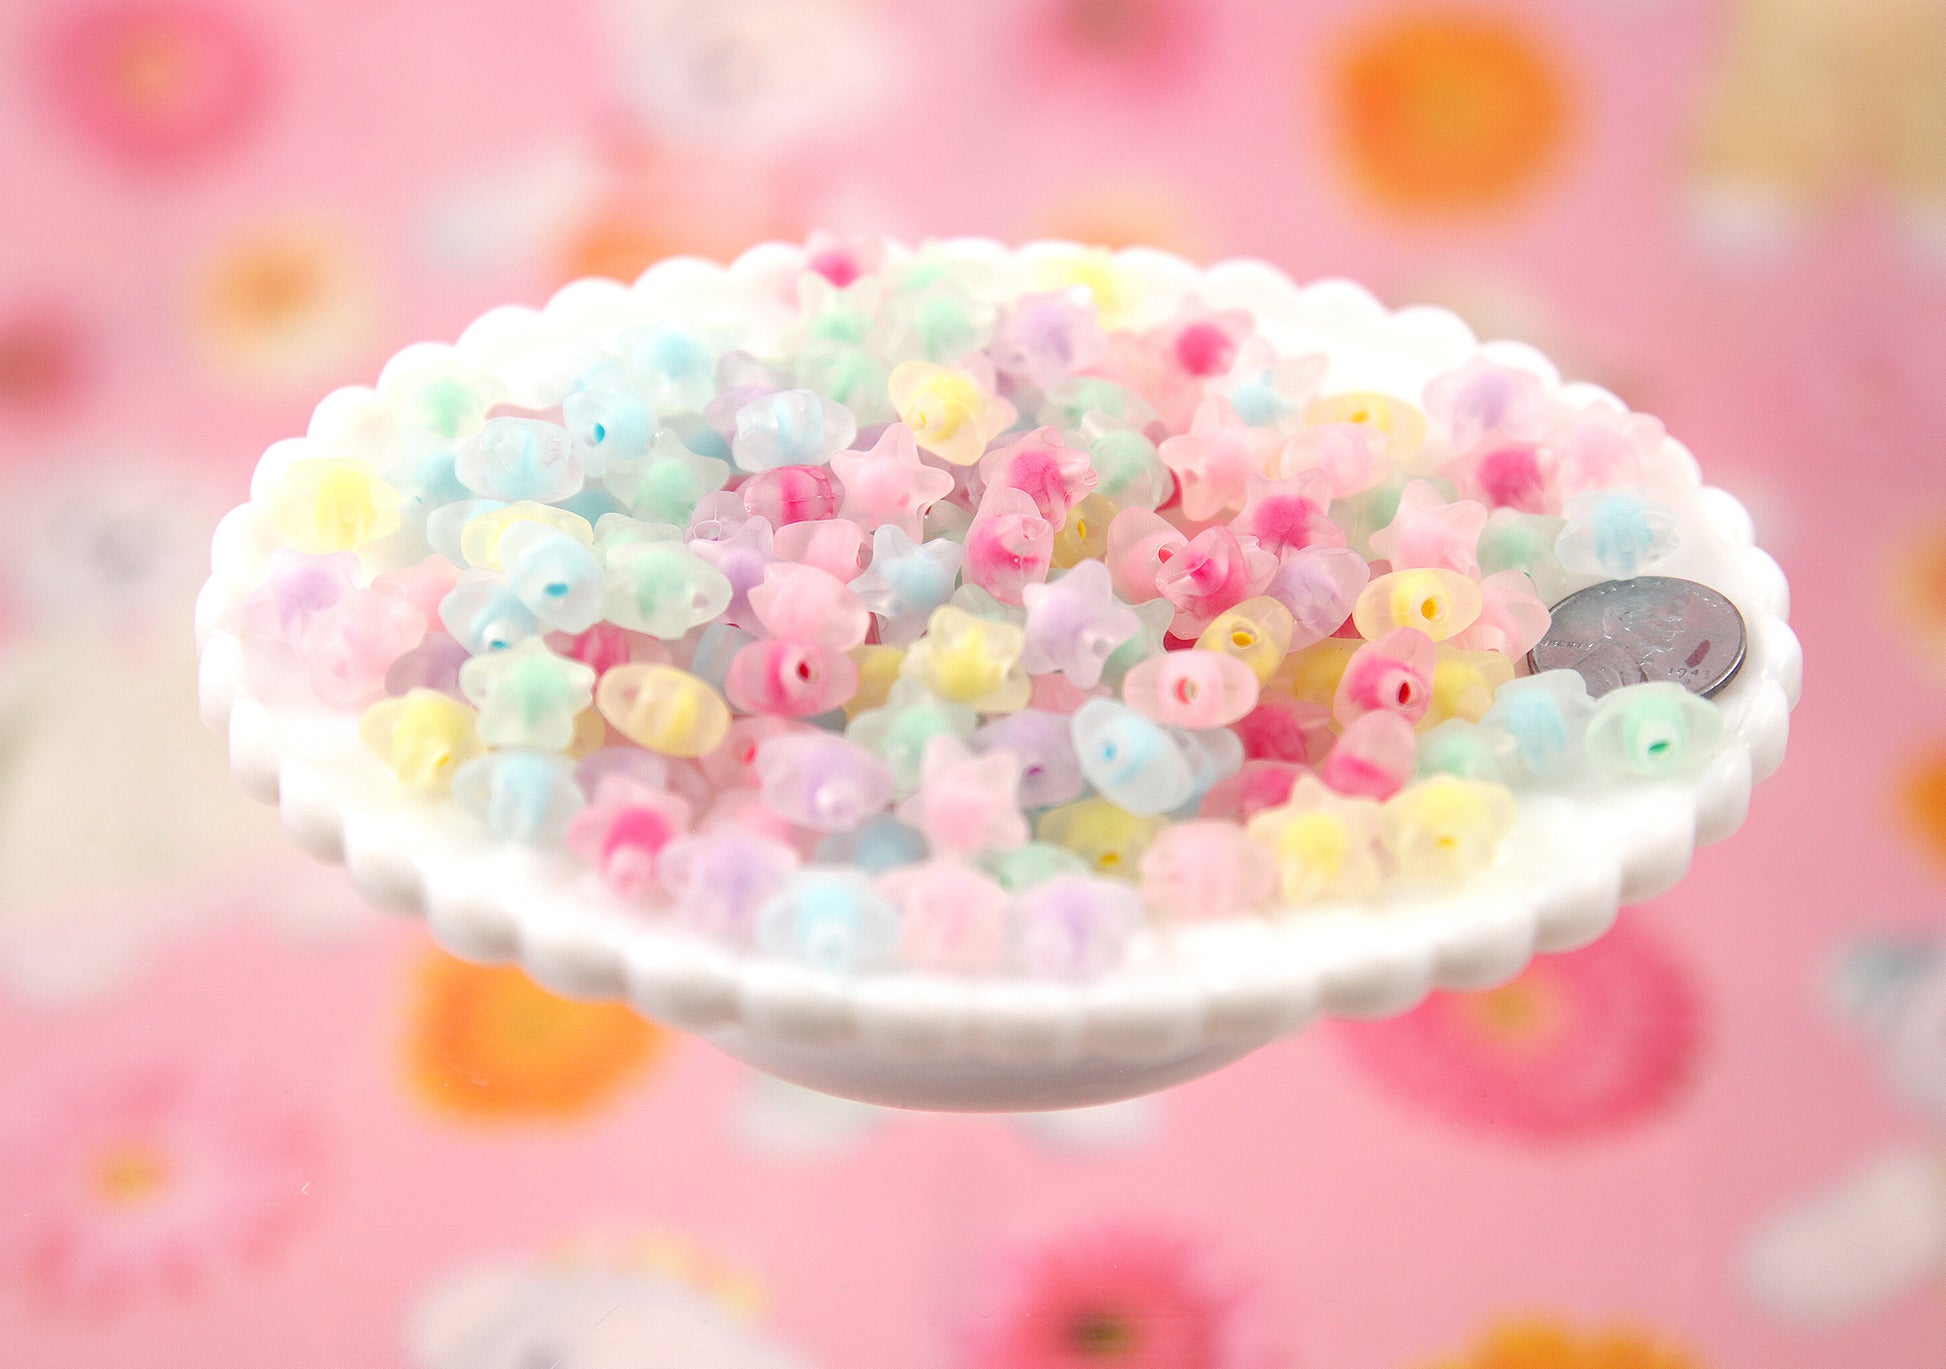 Star Beads - 12mm Small AB Stars Iridescent Pastel Resin or Acrylic Beads,  mixed color, small size beads - 150 pcs set